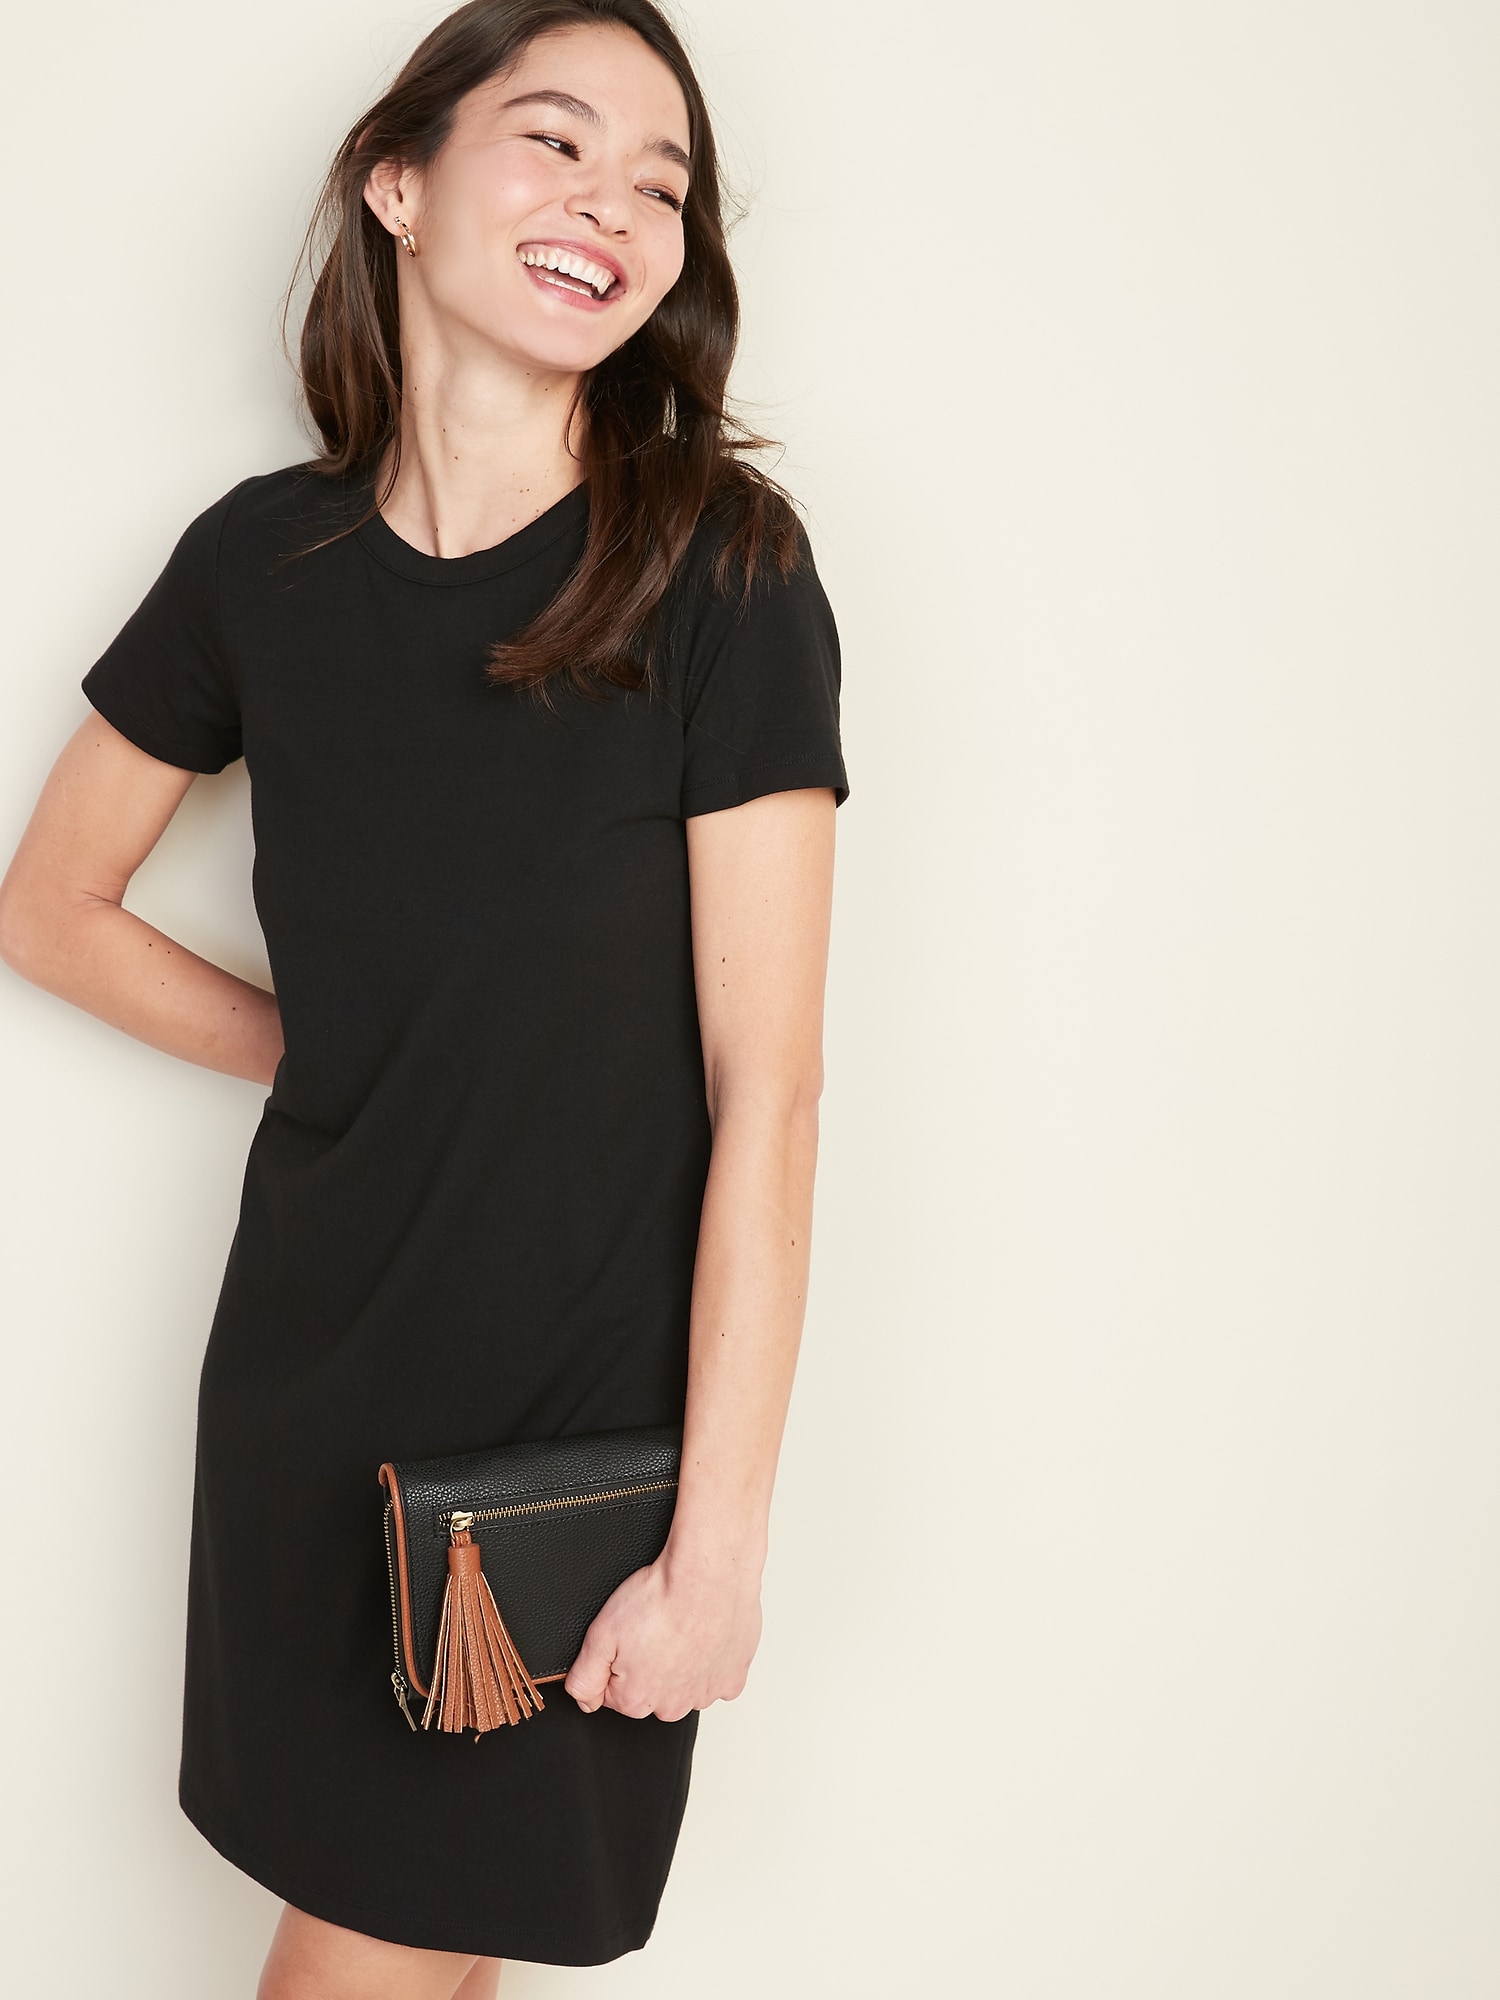 black fitted shirt dress